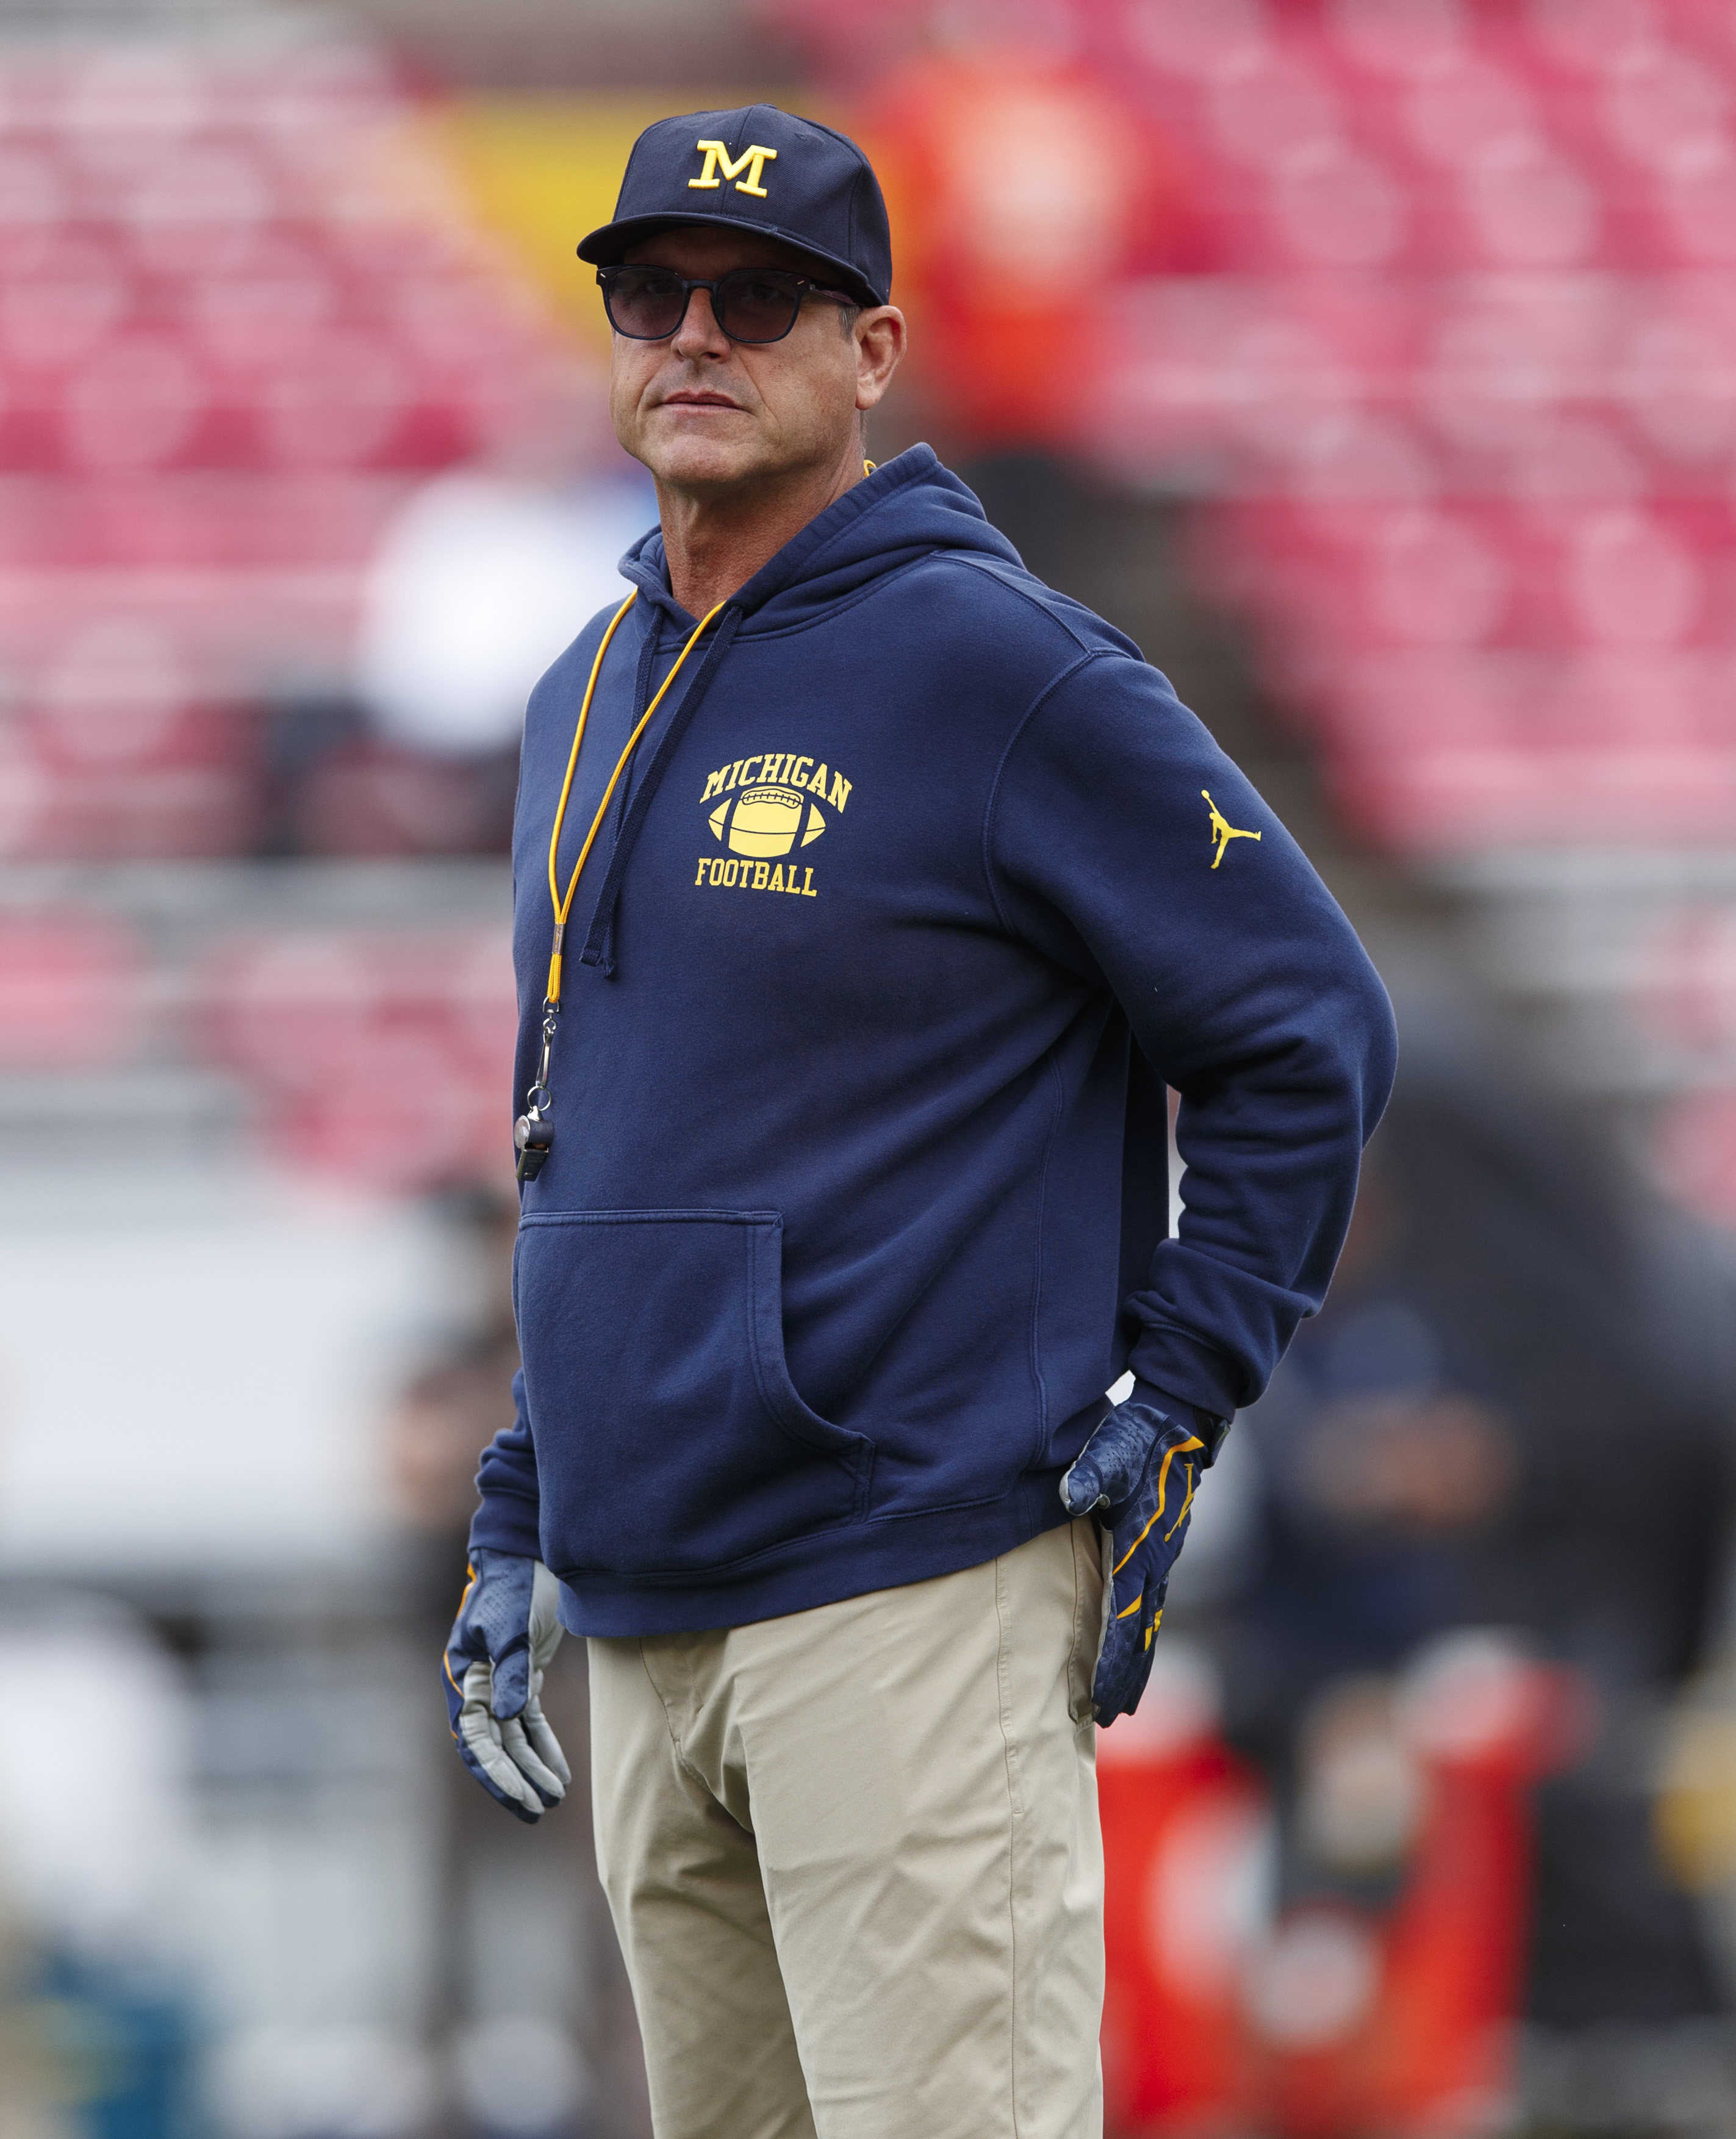 Harbaugh standing on the field during a Michigan game.